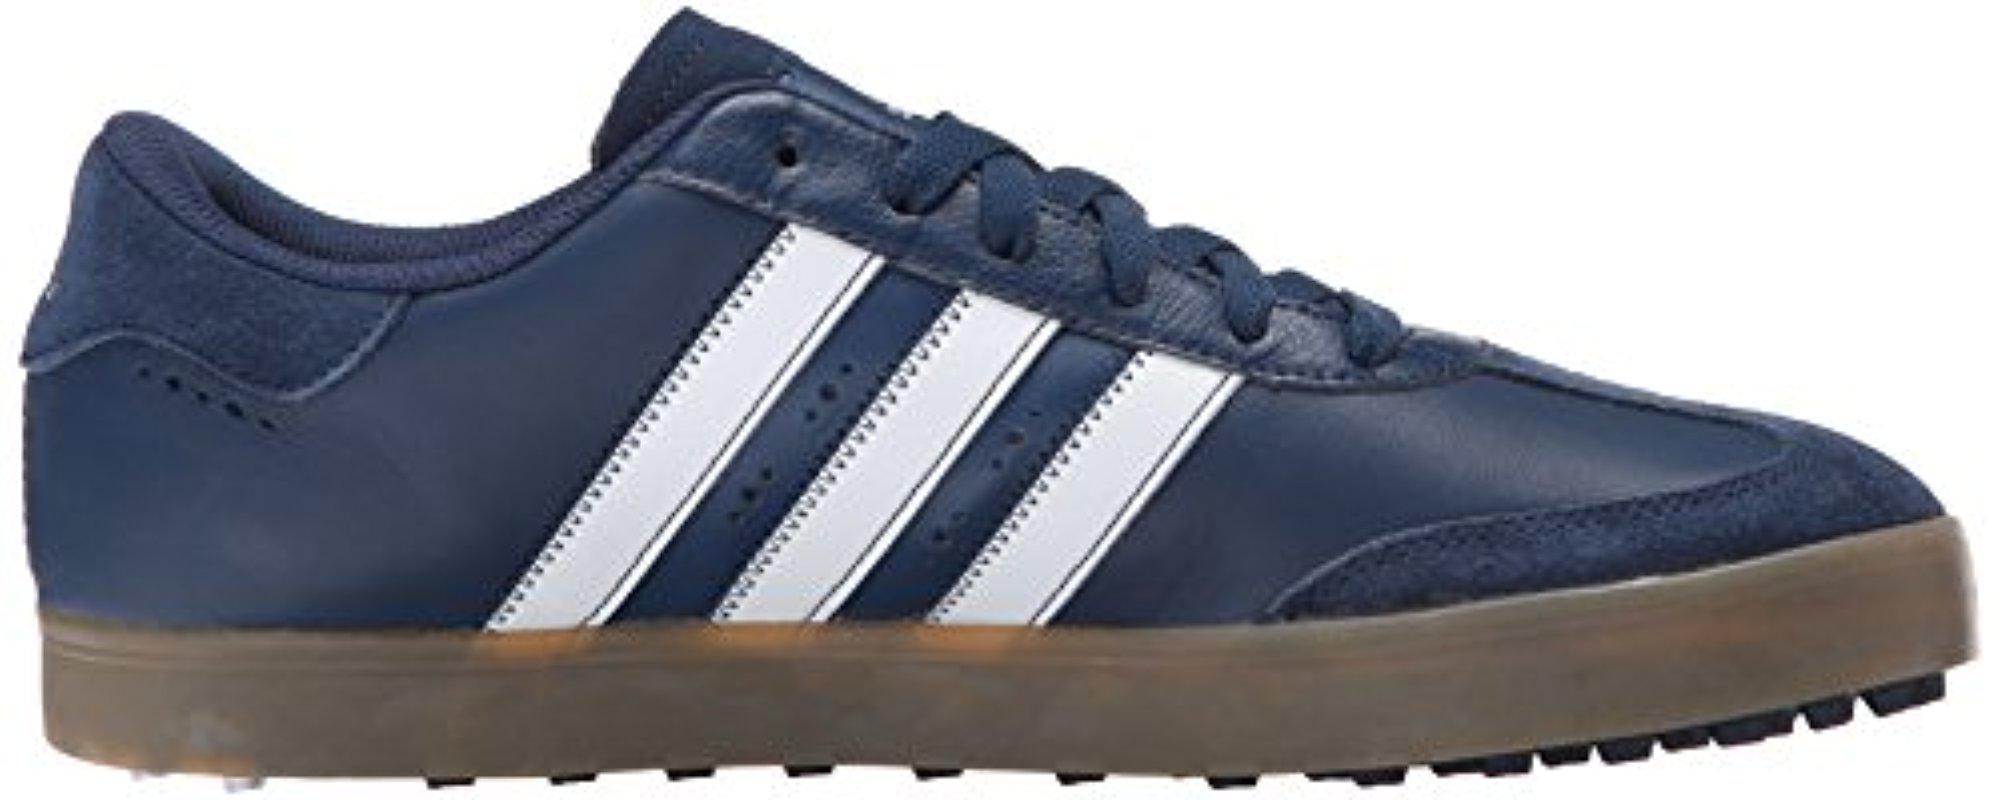 adidas Leather Adicross V Golf Spikeless Shoe in Blue for Men - Lyst